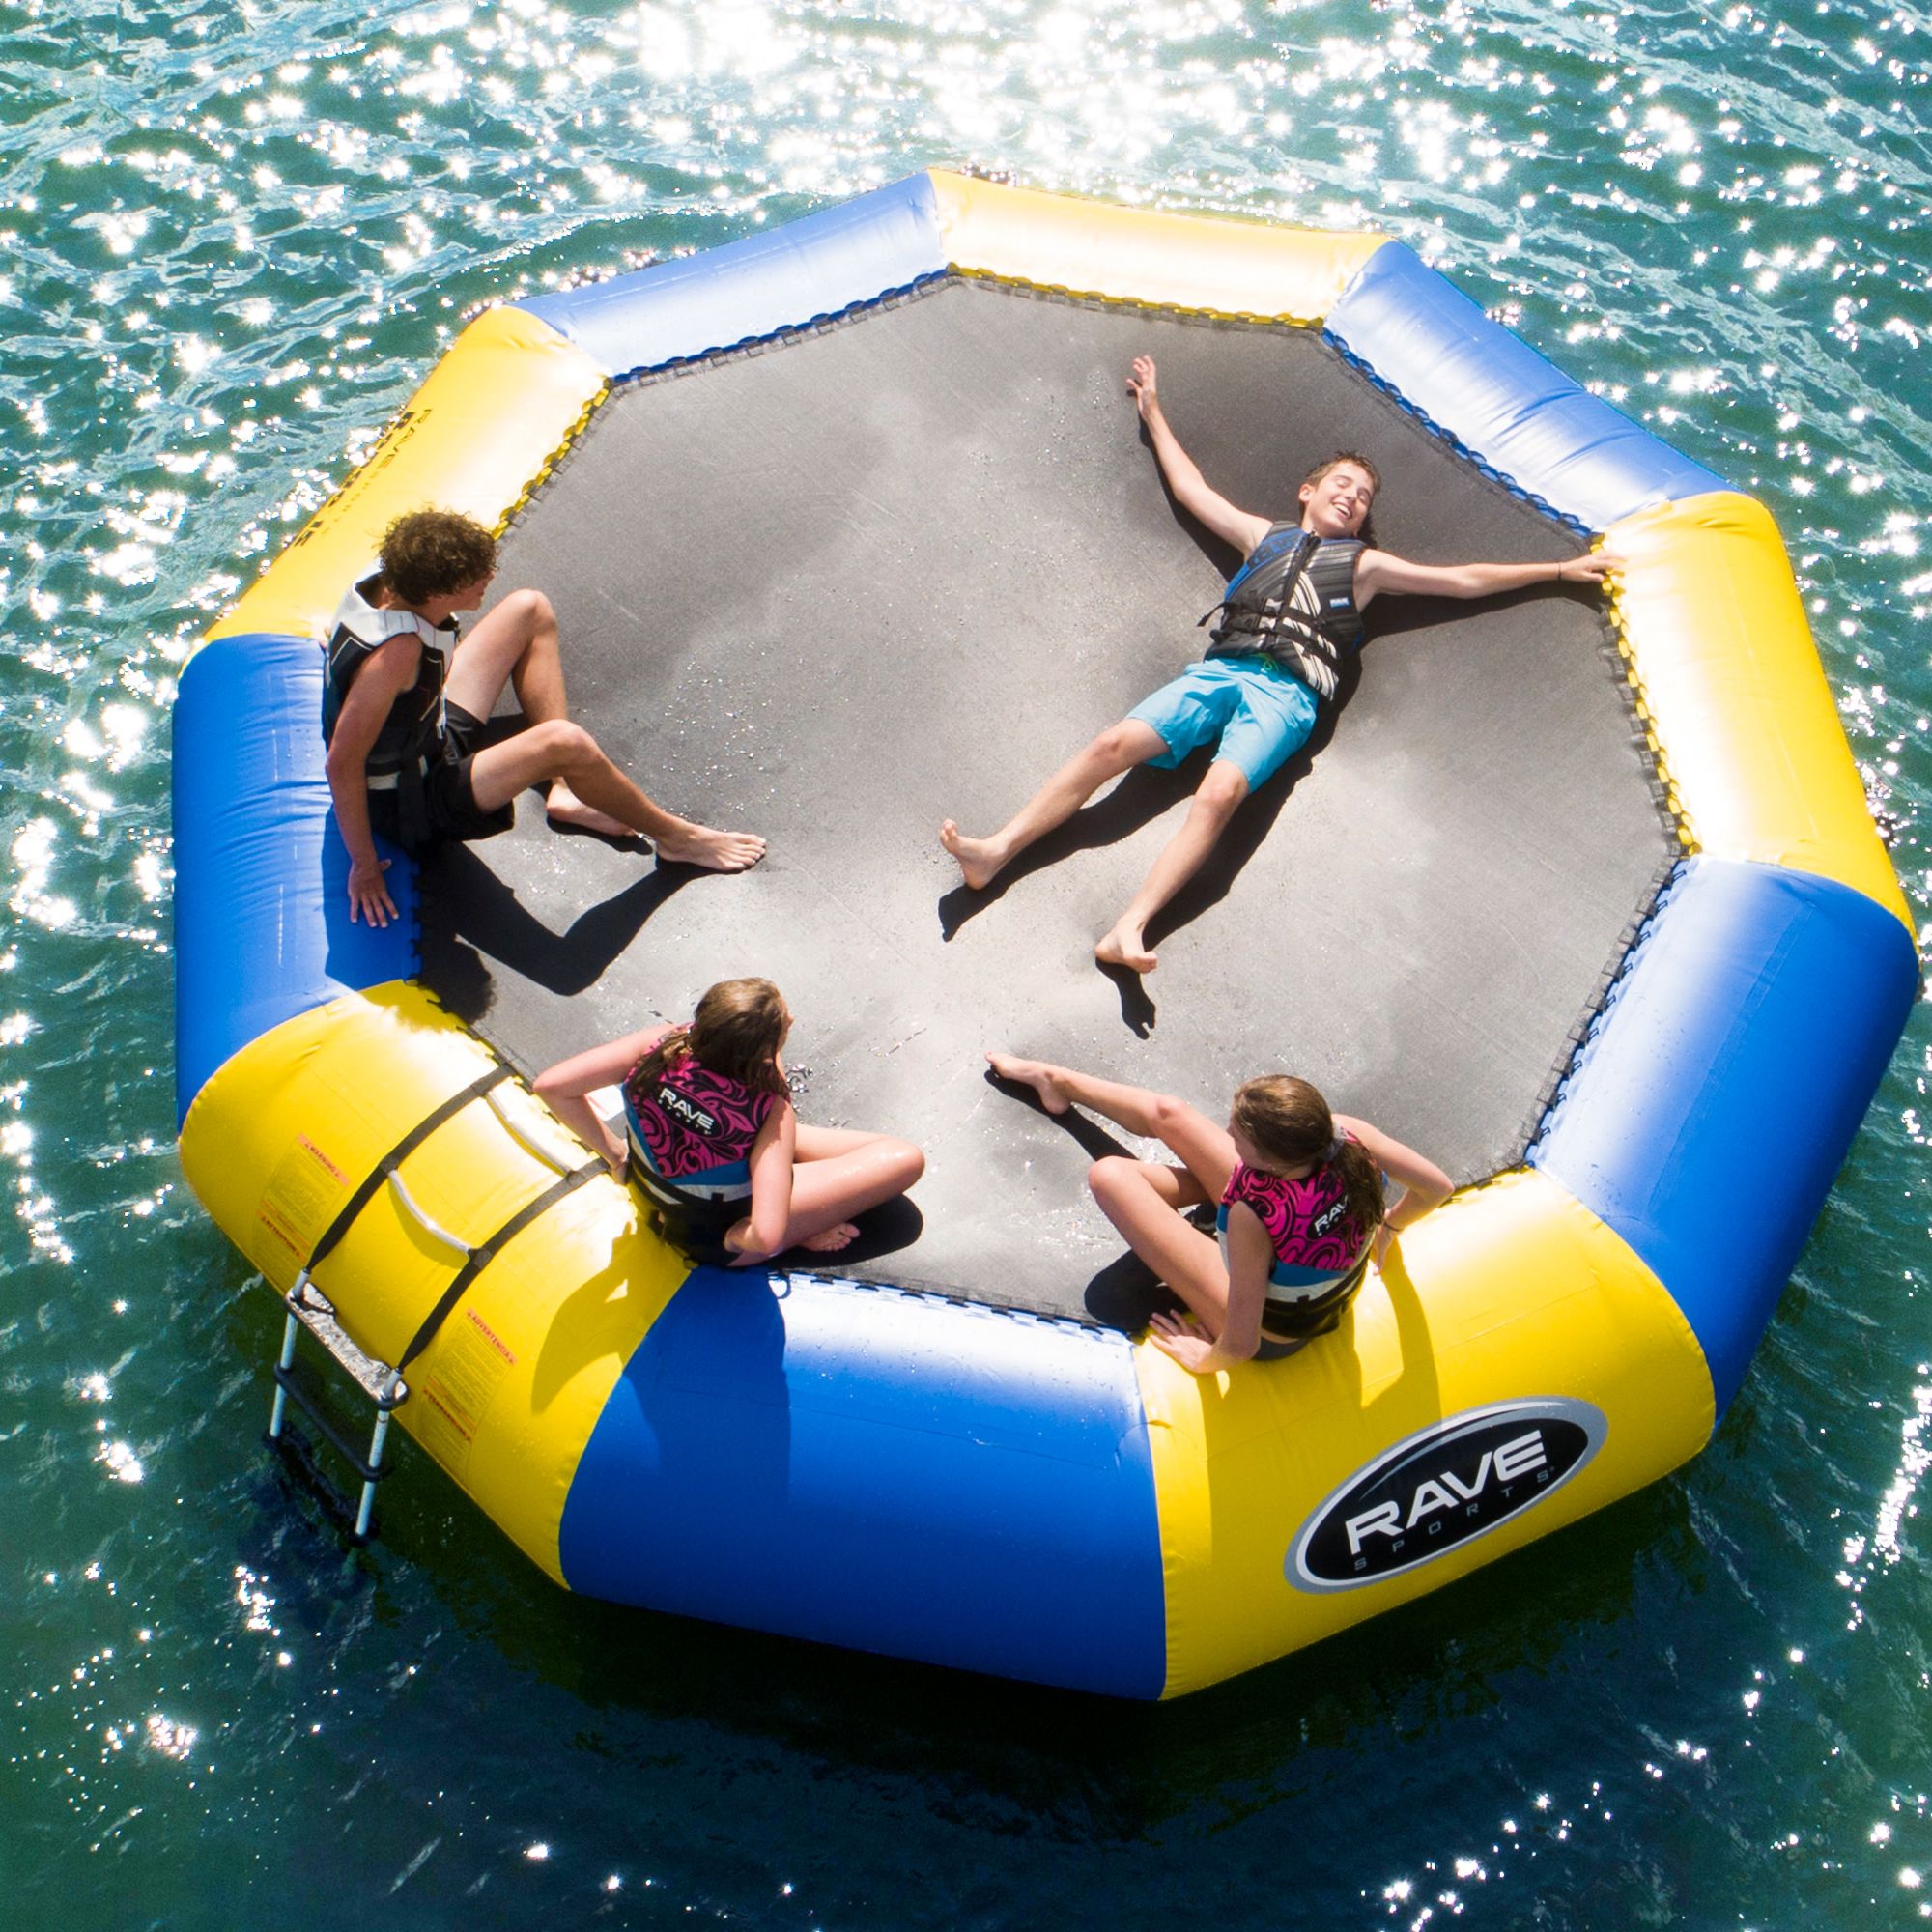 Rave Sports Bongo 15 Inflatable Water Bouncer